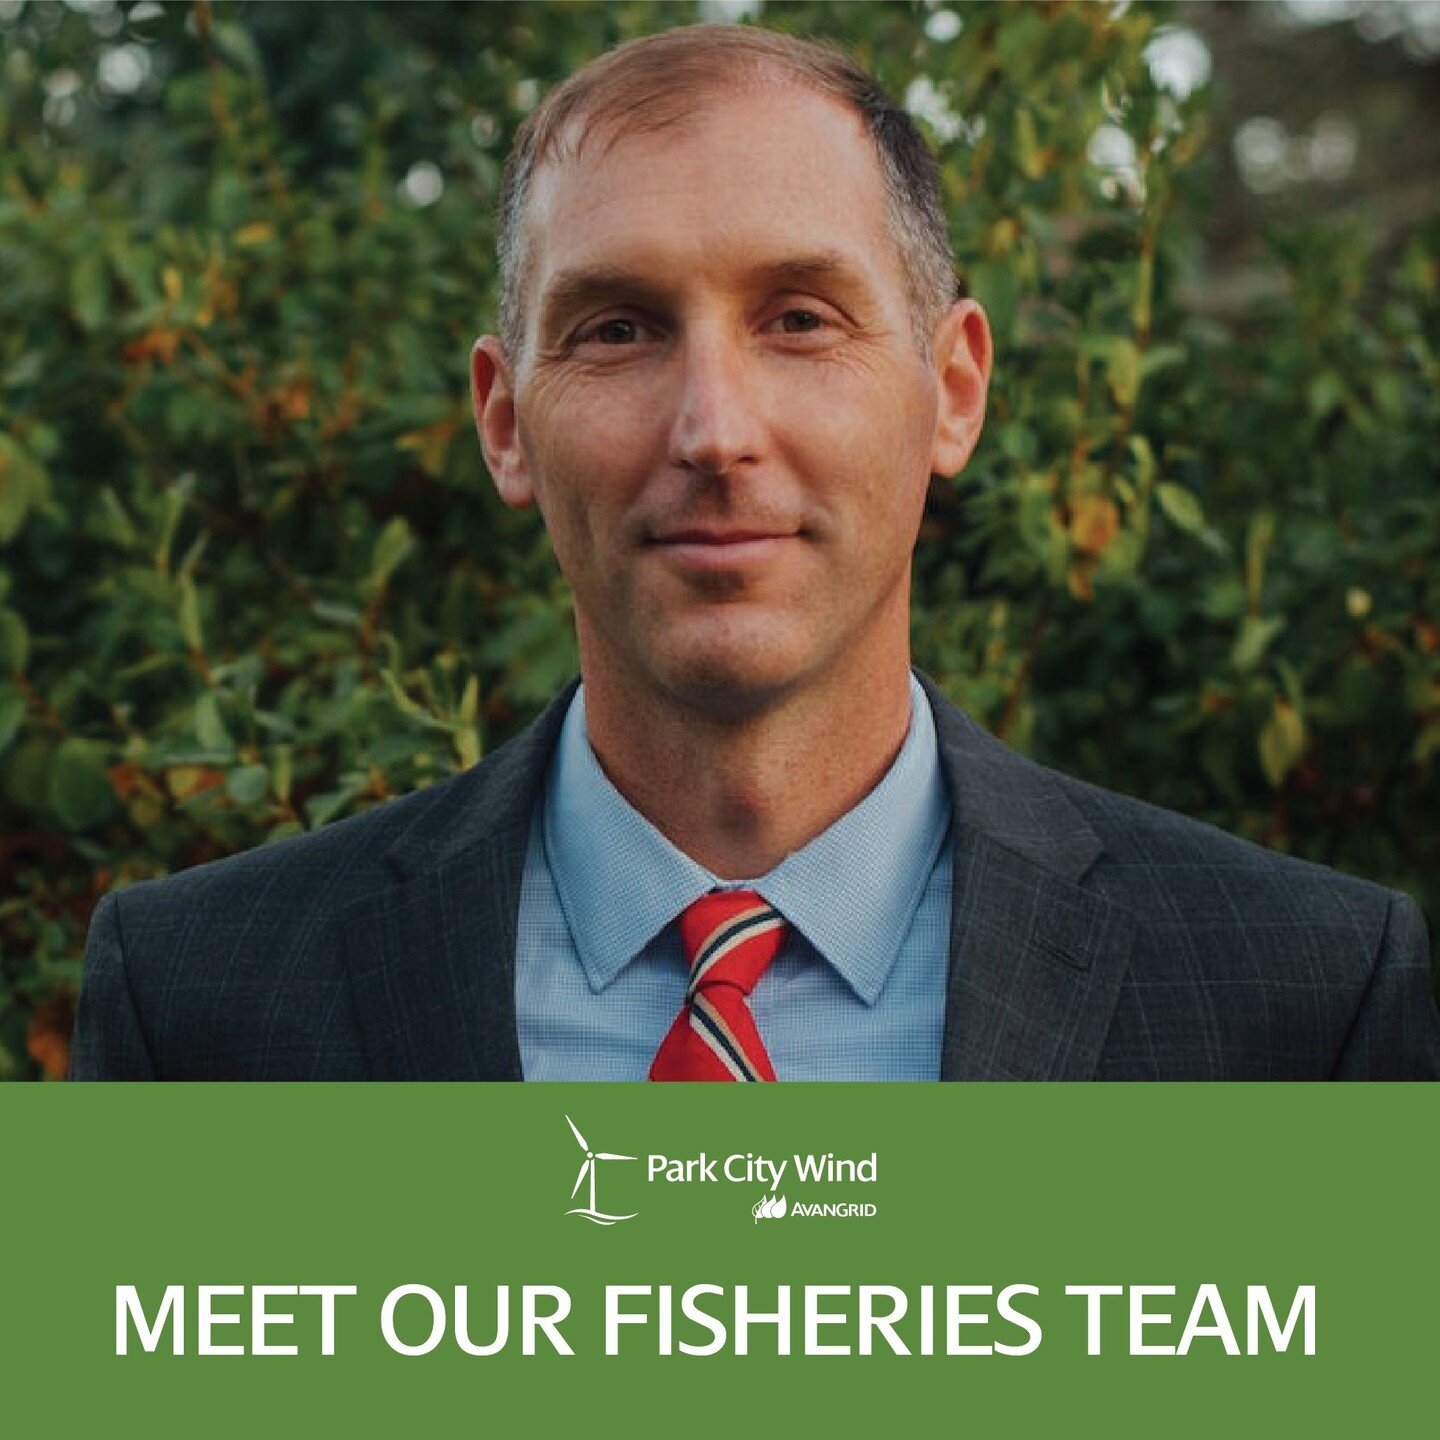 Meet our Fisheries Team: John Harker, Lead Fisheries Outreach Coordinator

John brings 22 years of experience in the U.S. Coast Guard to our projects. Formerly serving as part of the Coast Guard Incident Management Team, he worked to bridge organizat